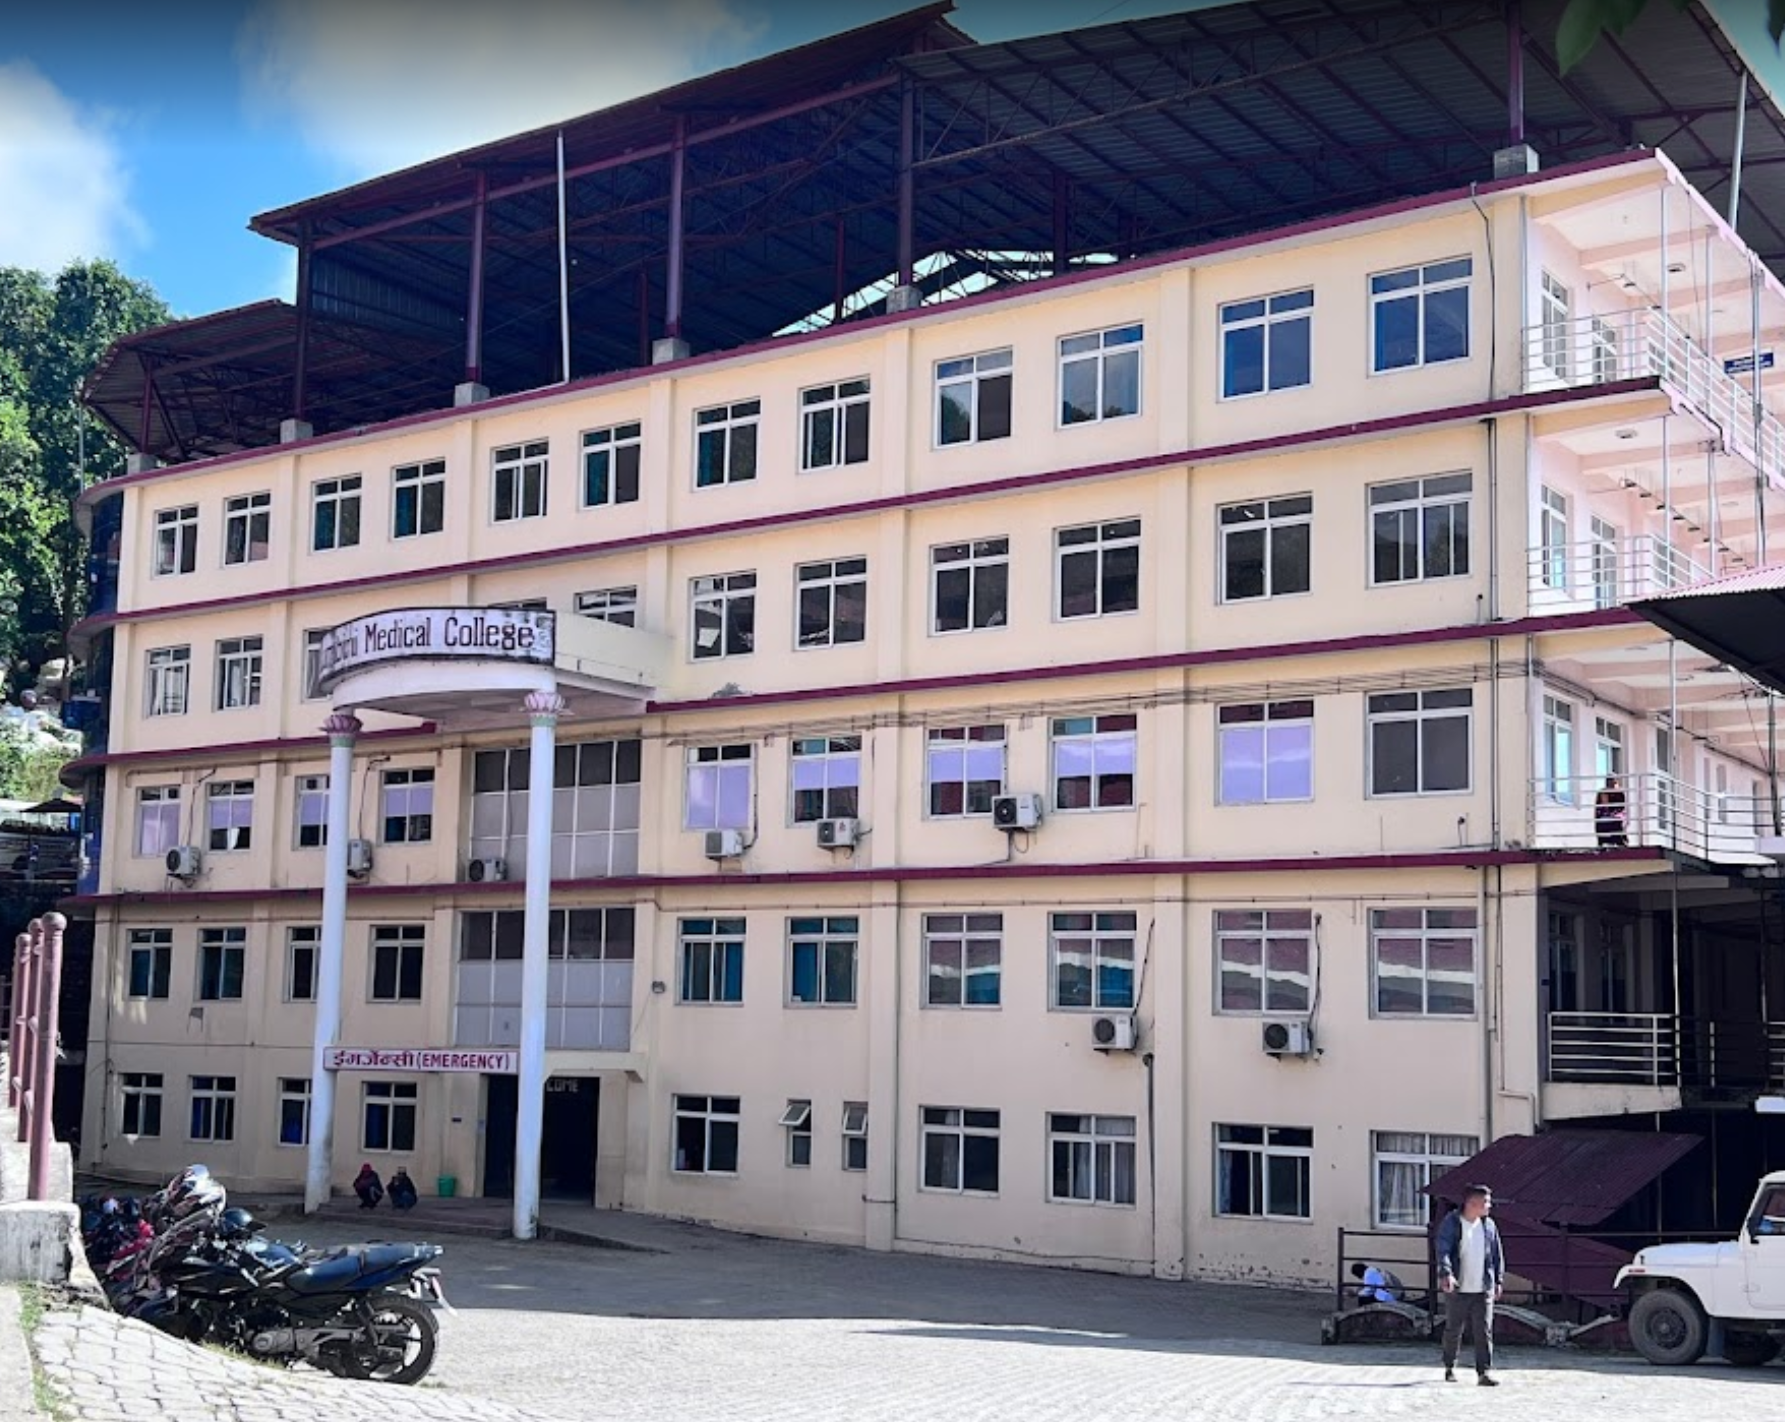 Lumbini Medical College Tansen Nepal Admission, Courses Offered, Fees Structure, Rankings